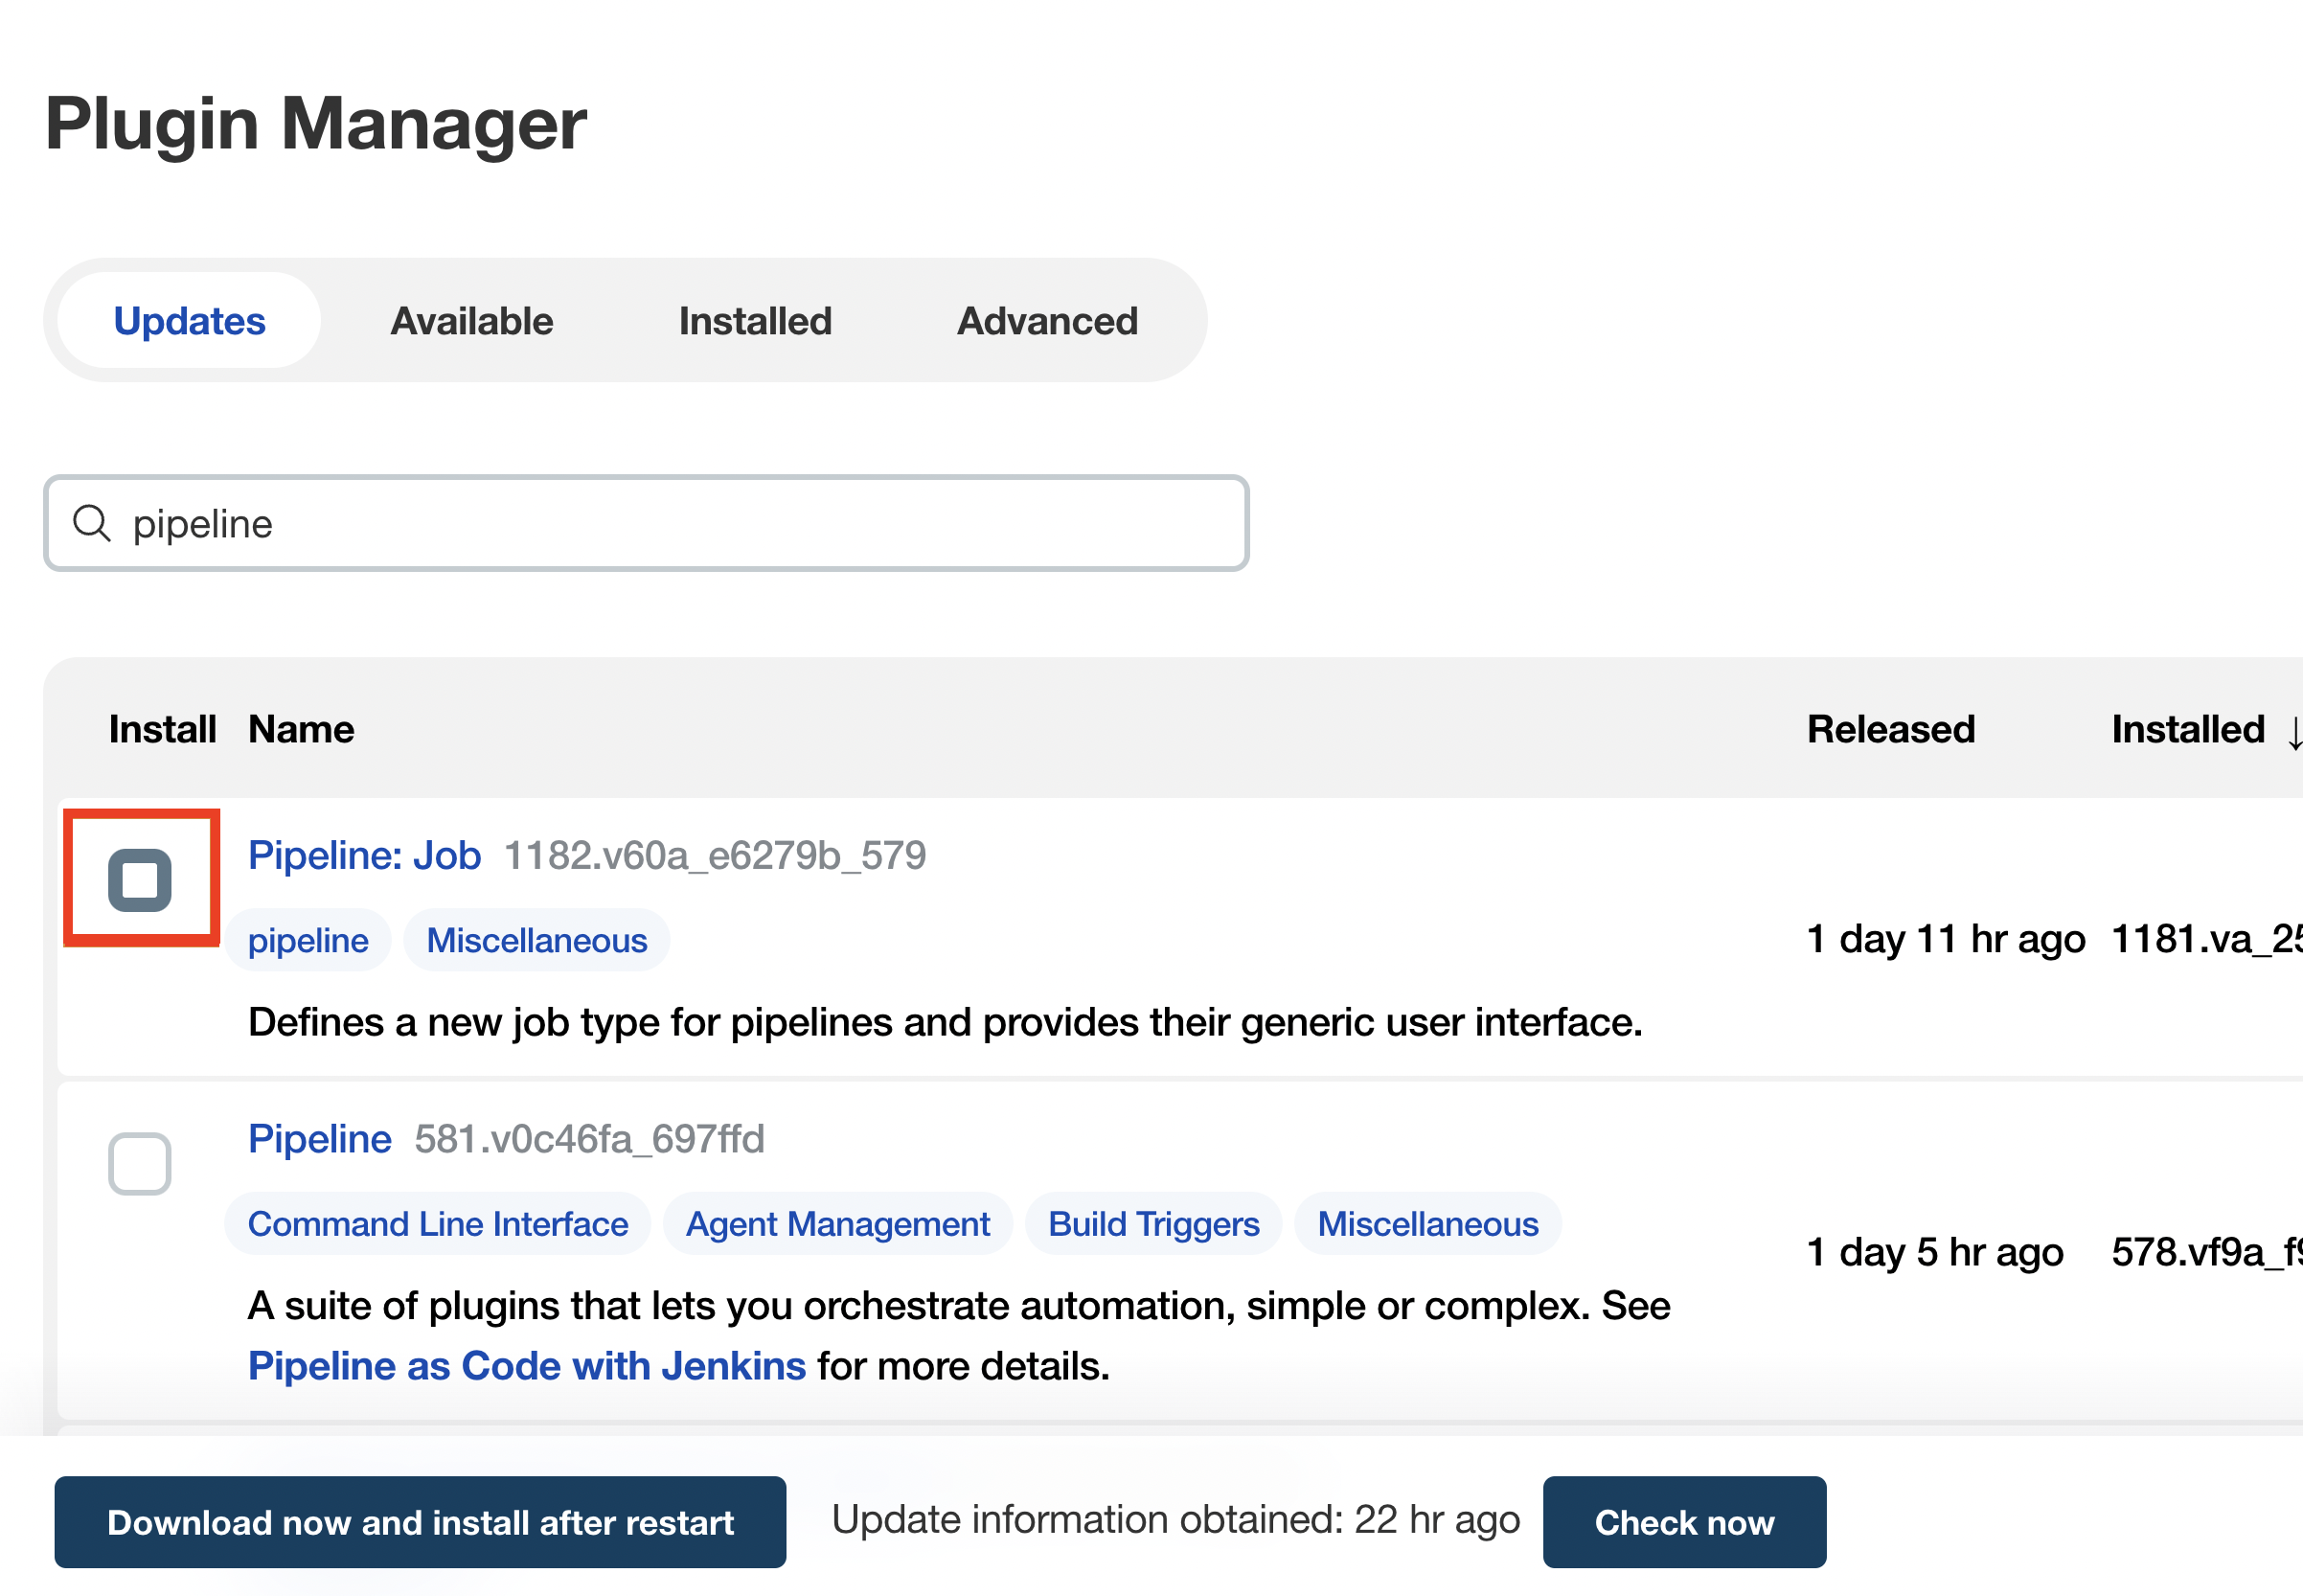 Updates tab in the Plugin Manager